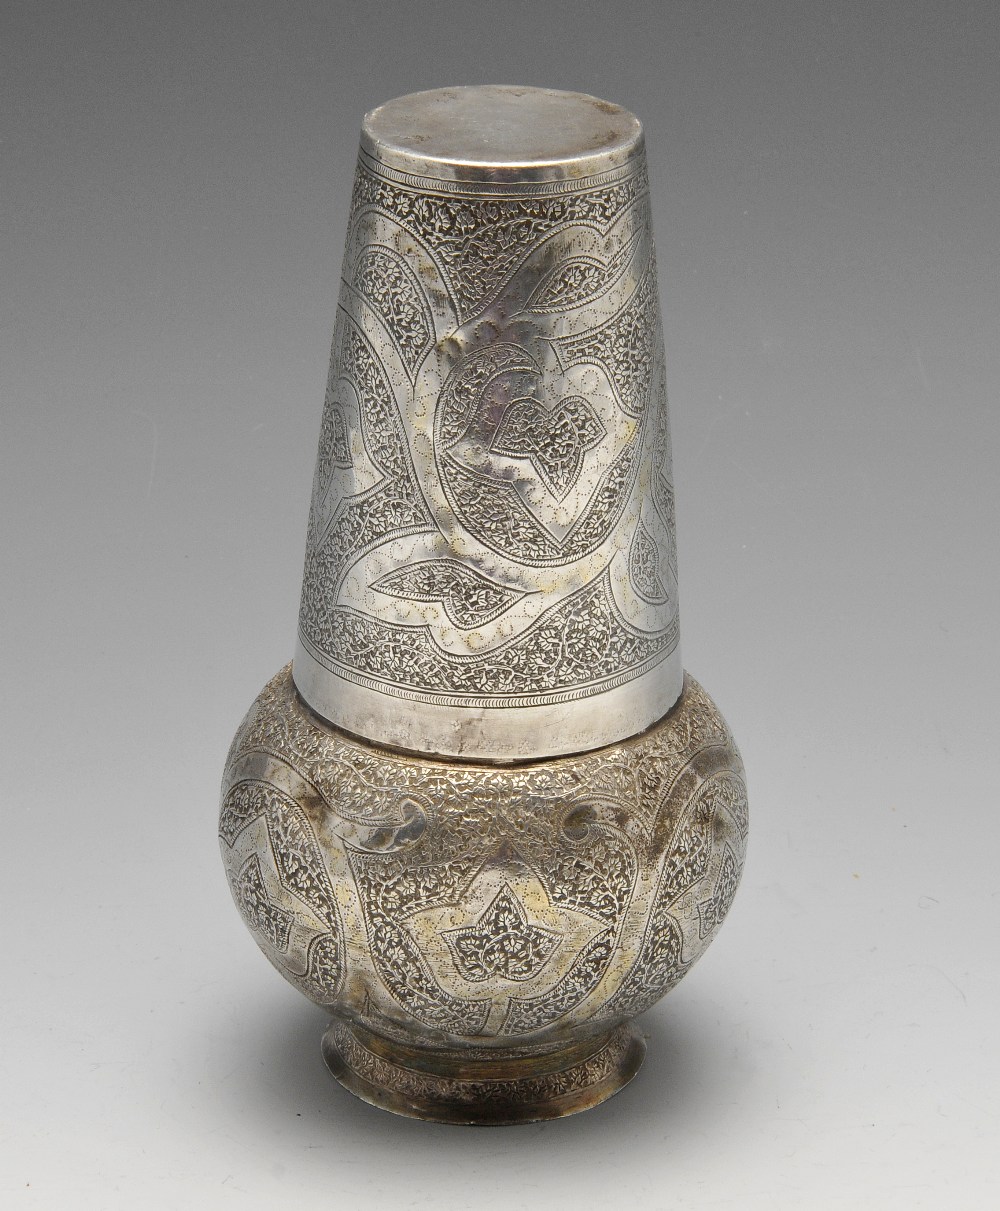 A Persian jug of vase form and ornately close chased with foliate decoration and matching tapered